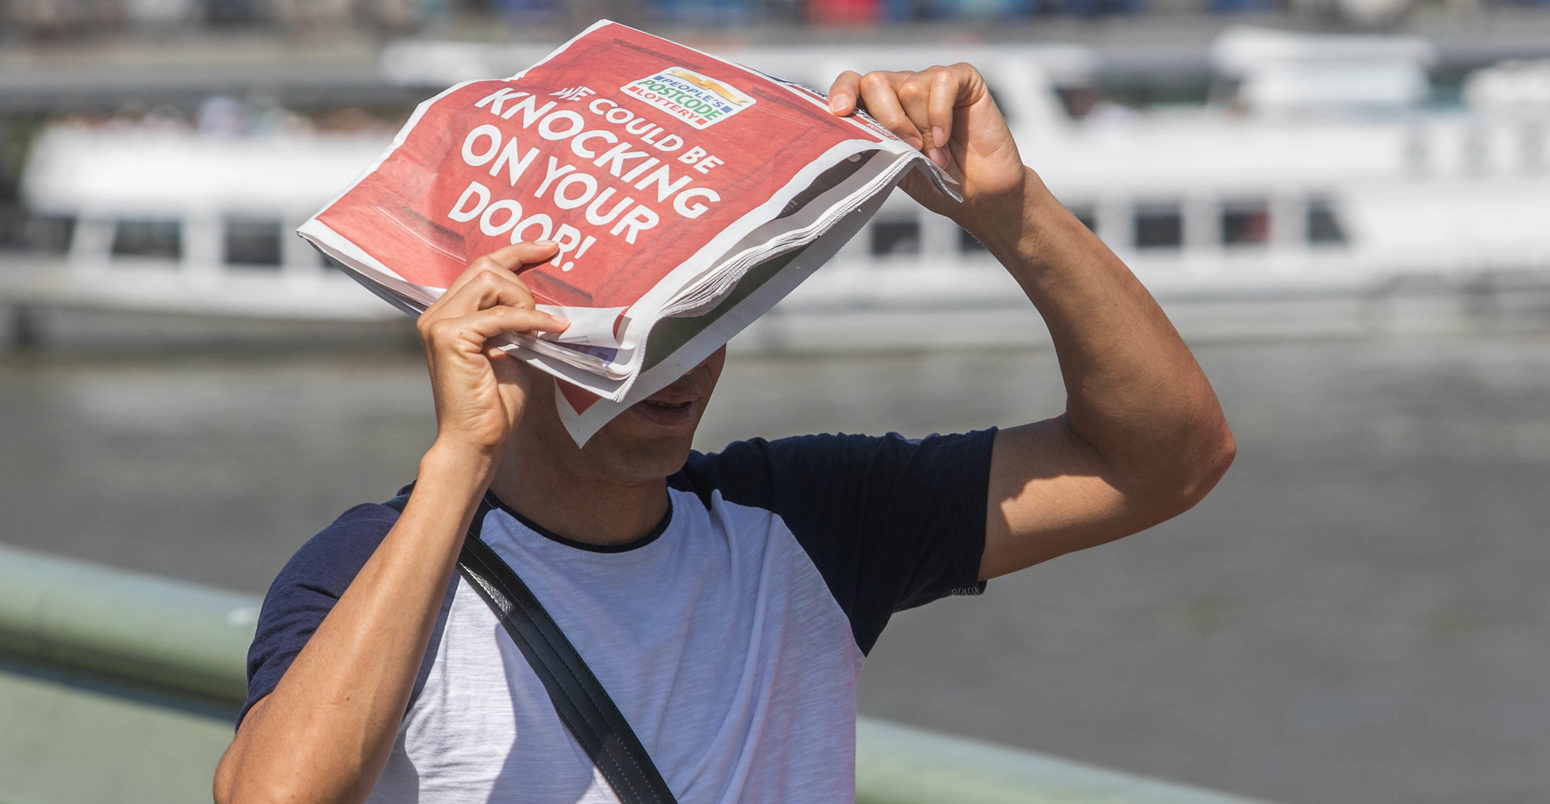 A pedestrian on Waterloo Bridge shelters with a newspaper from the sun. 25 July 2019, London.